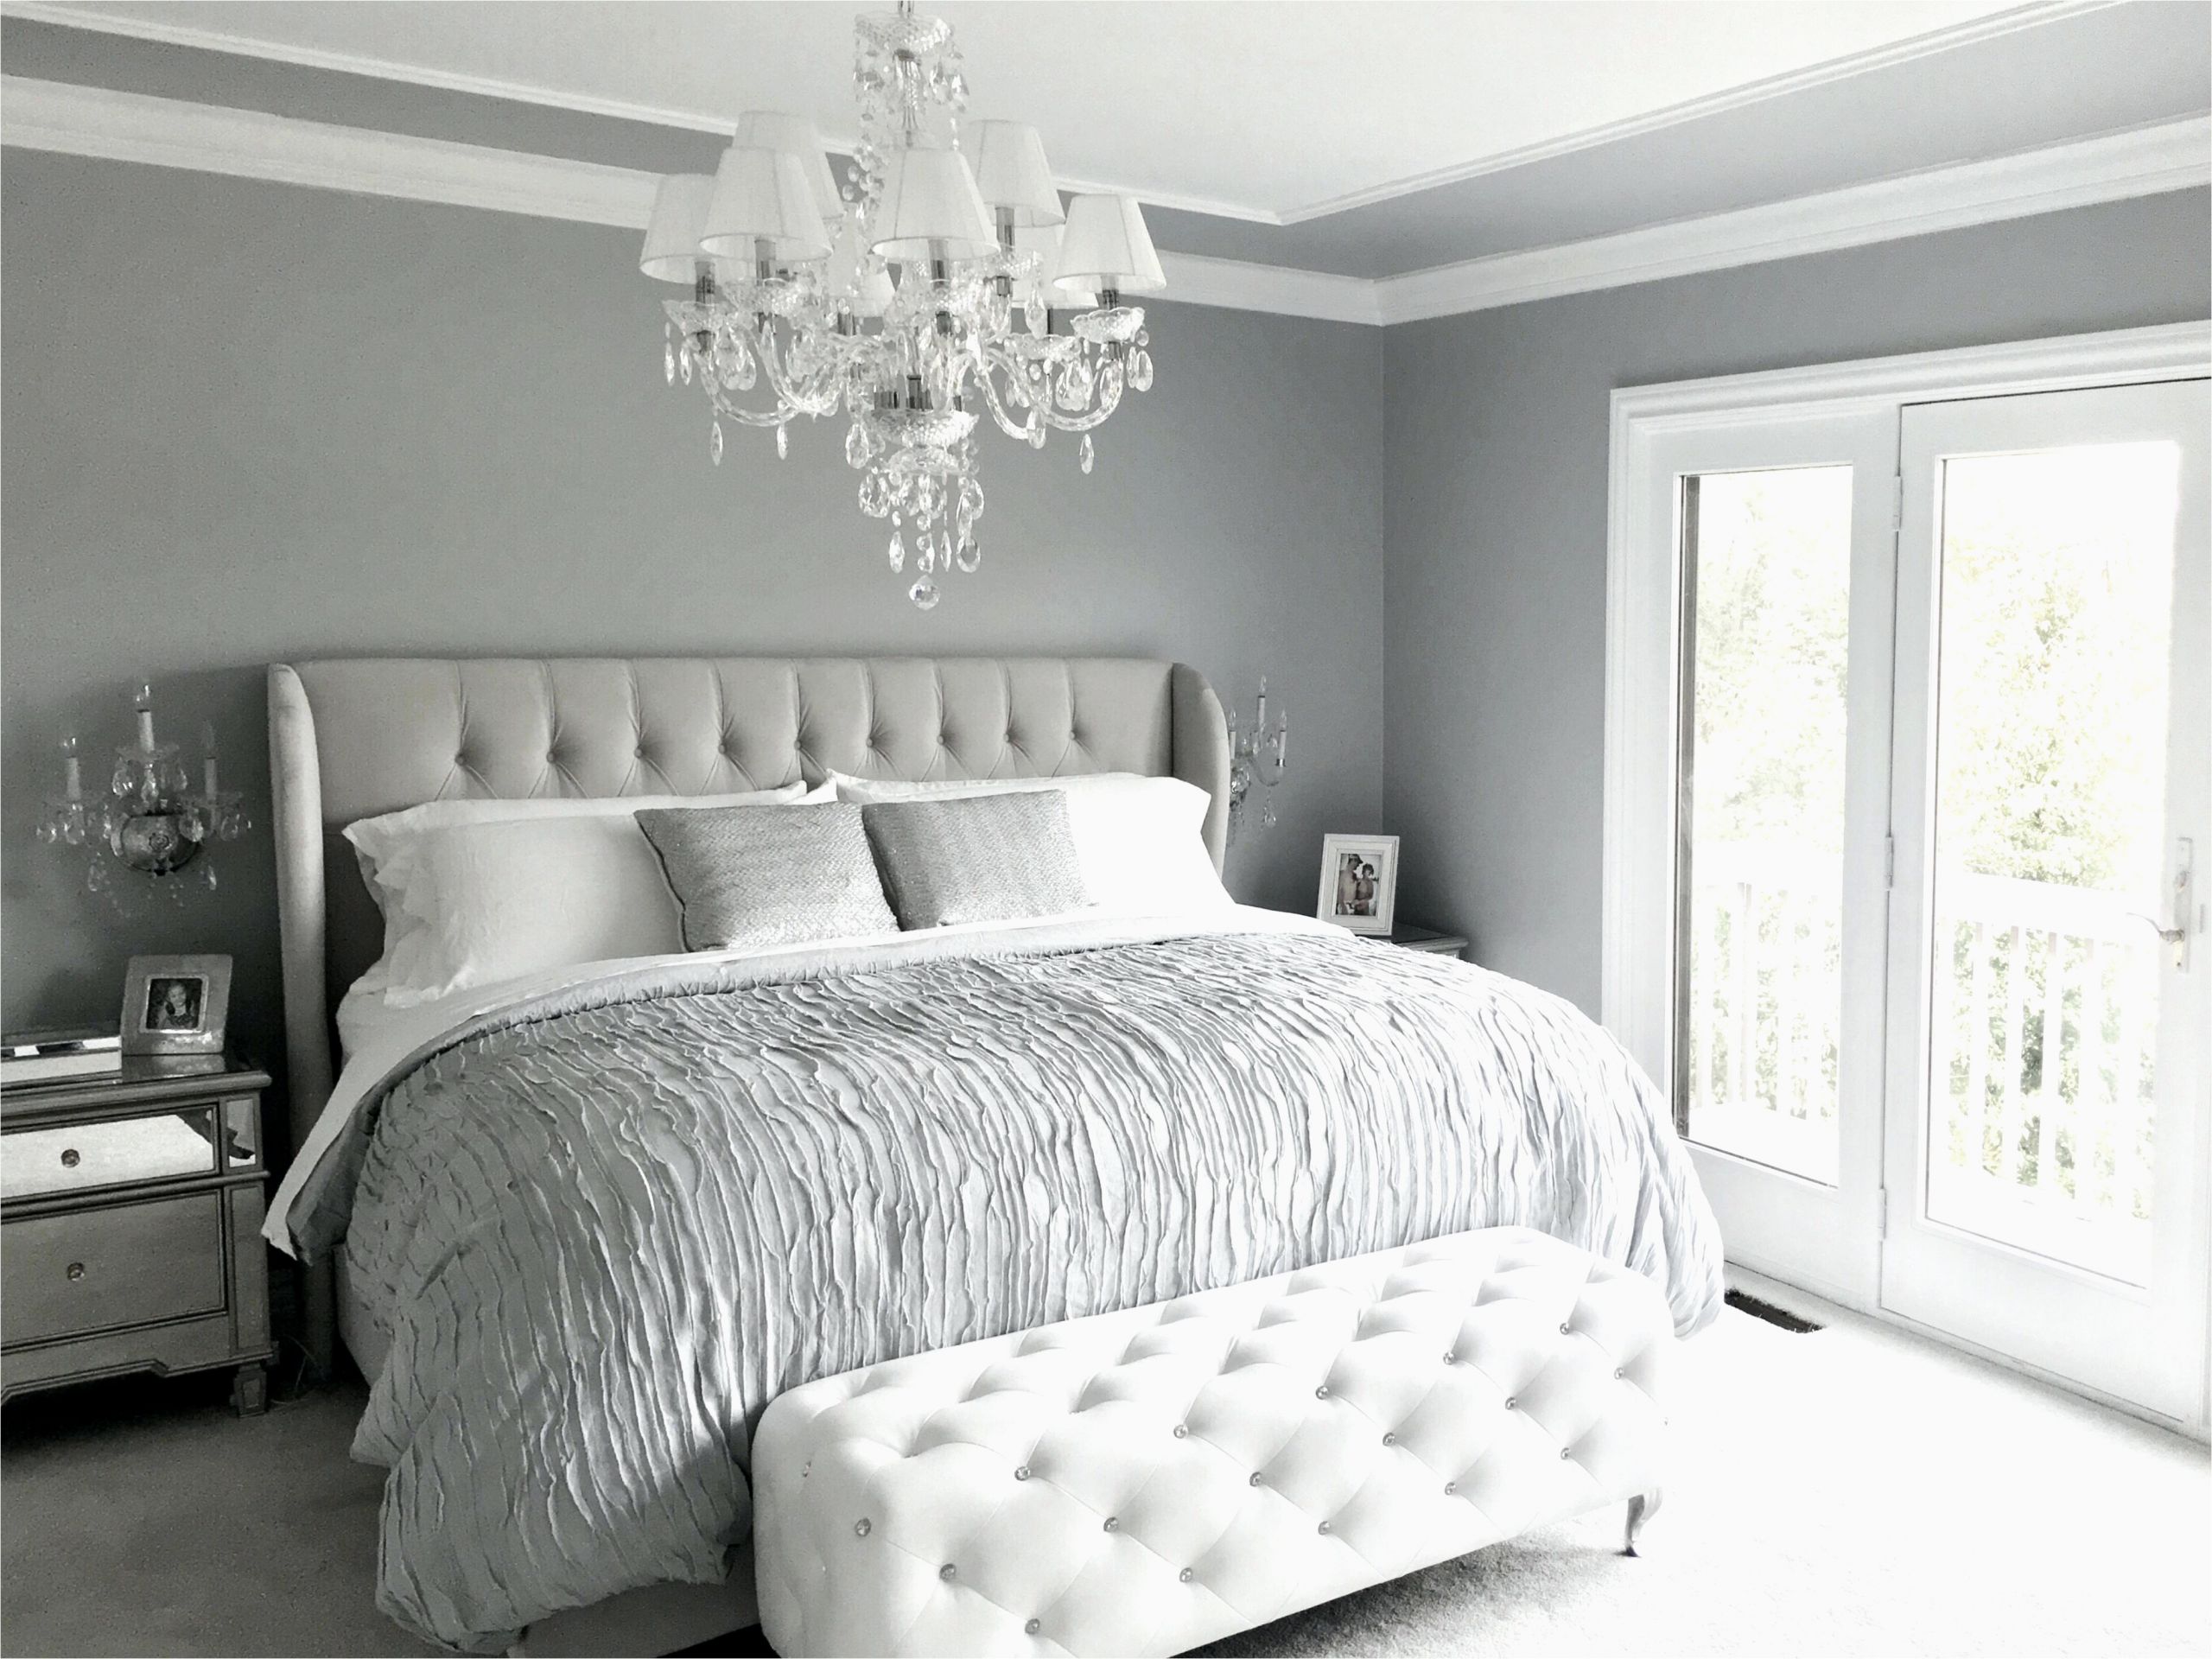 Grey Wall Bedroom Ideas
 Gray decoration for bedrooms How to look elegant and warm